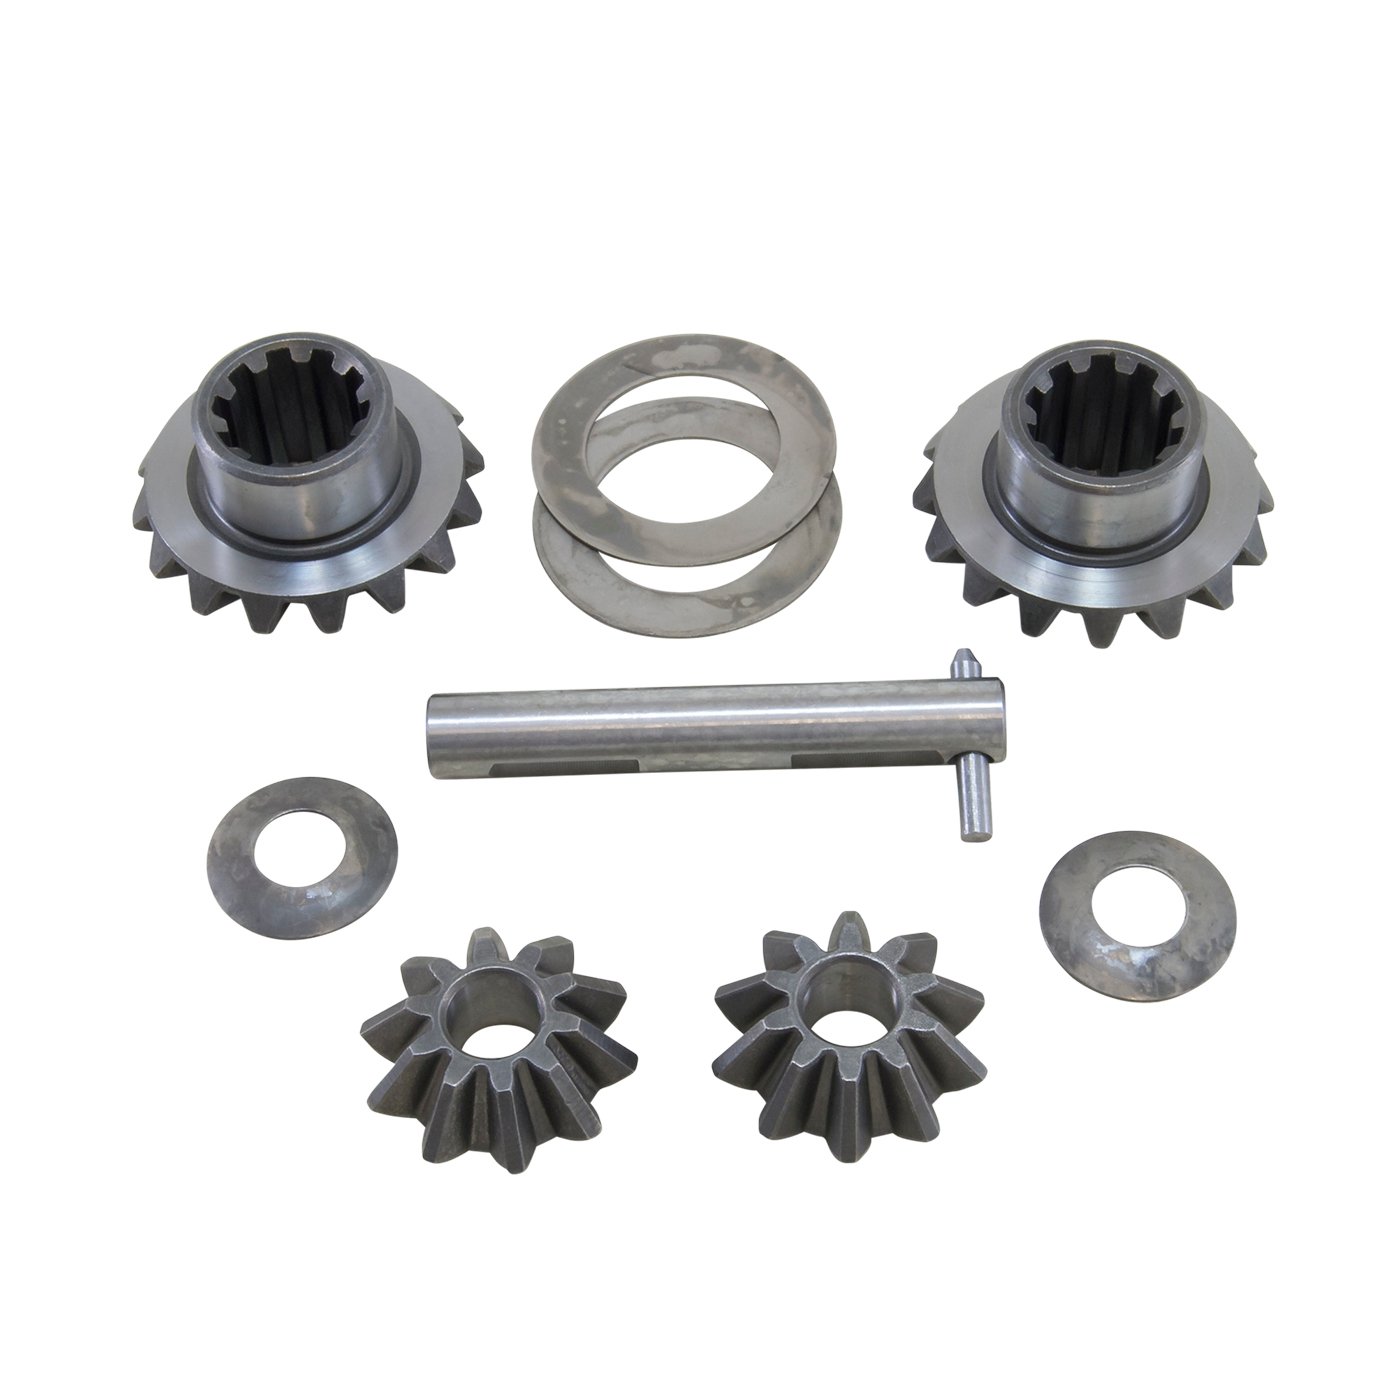 Standard Open Spider Gear Replacement Kit For Dana 25 And 27, 10 Spline